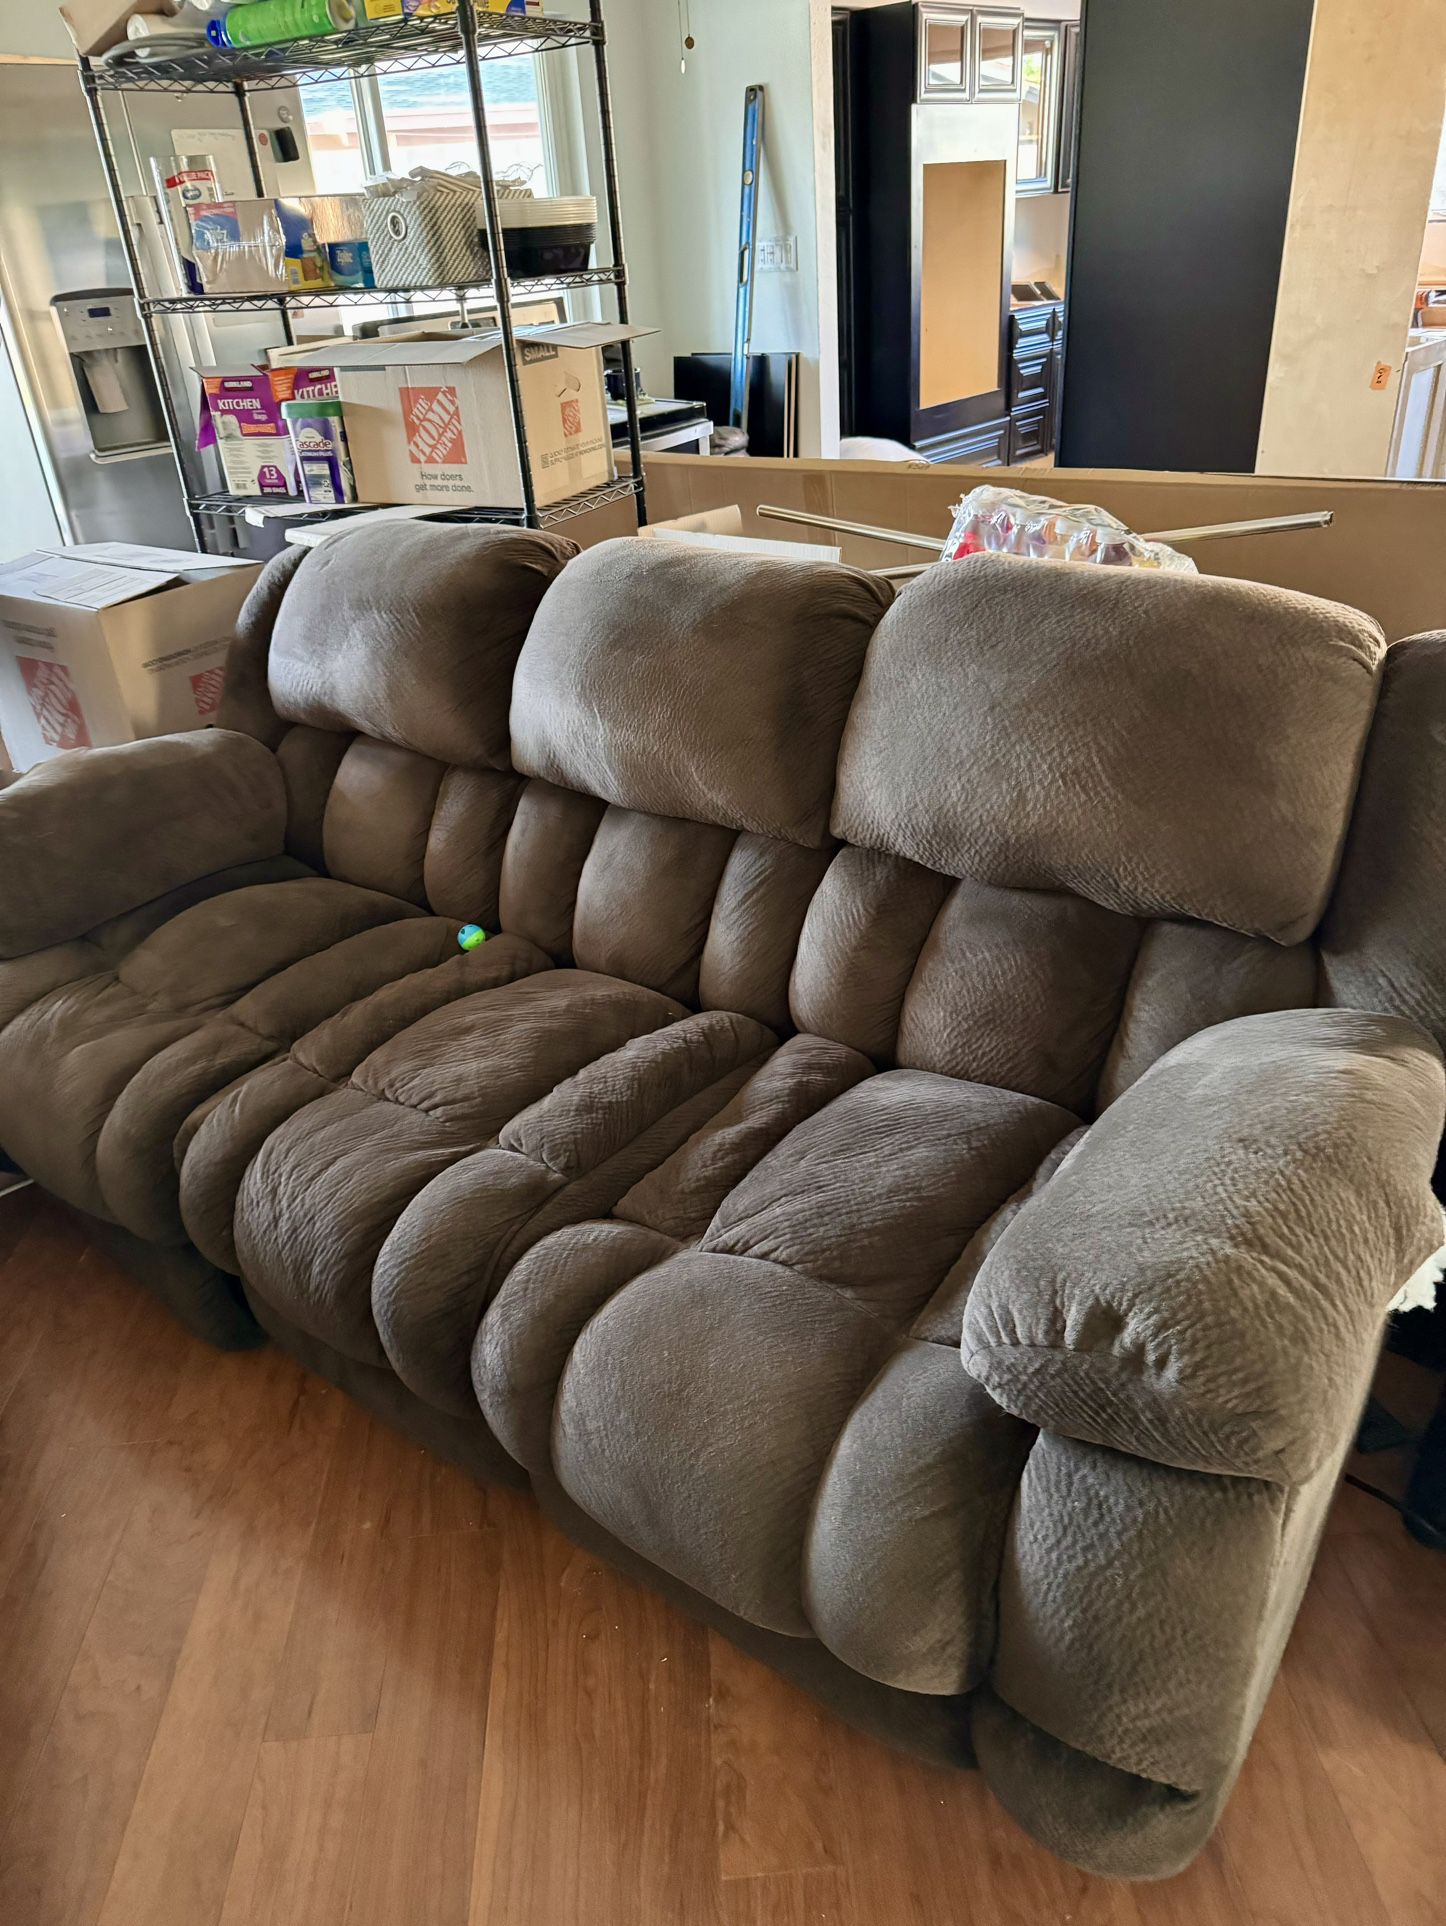 Comfy couch set - Extra Wide 3-seater and Loveseat